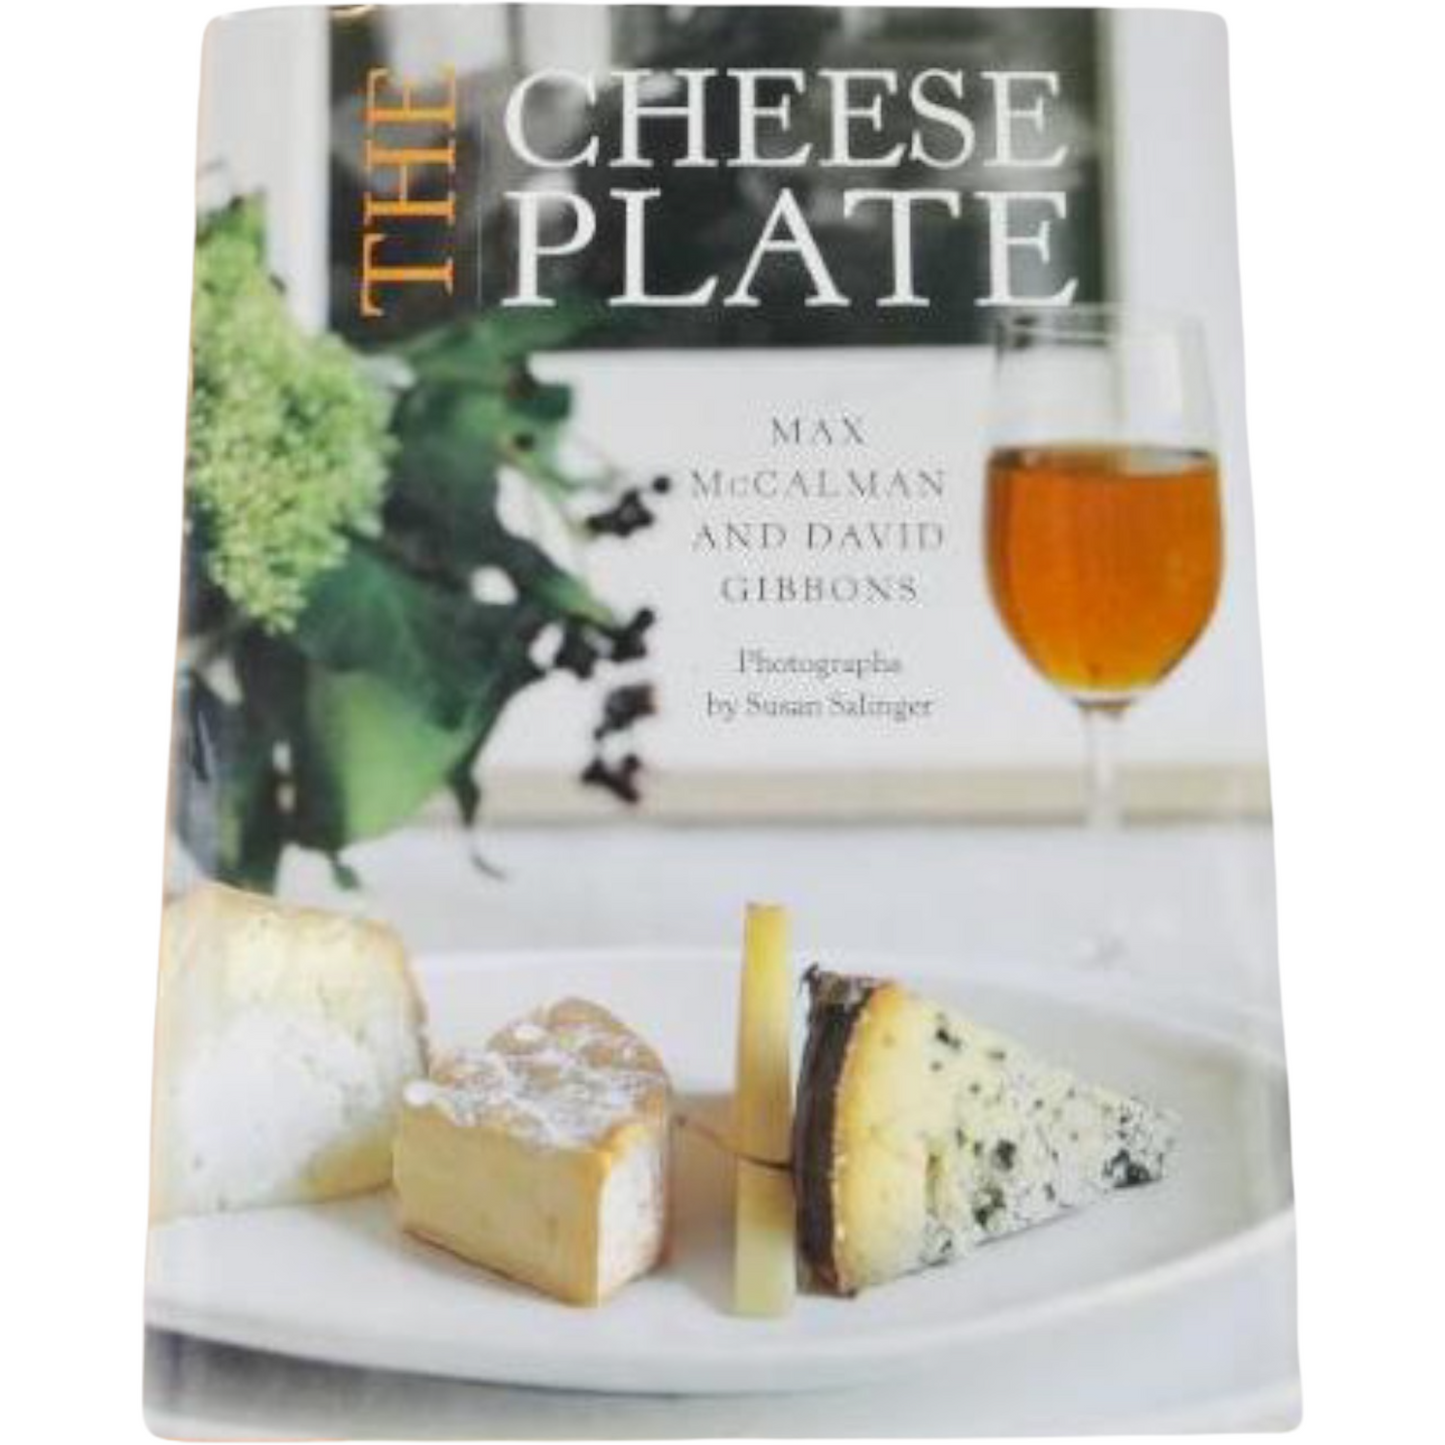 THE CHEESE PLATE BOOK